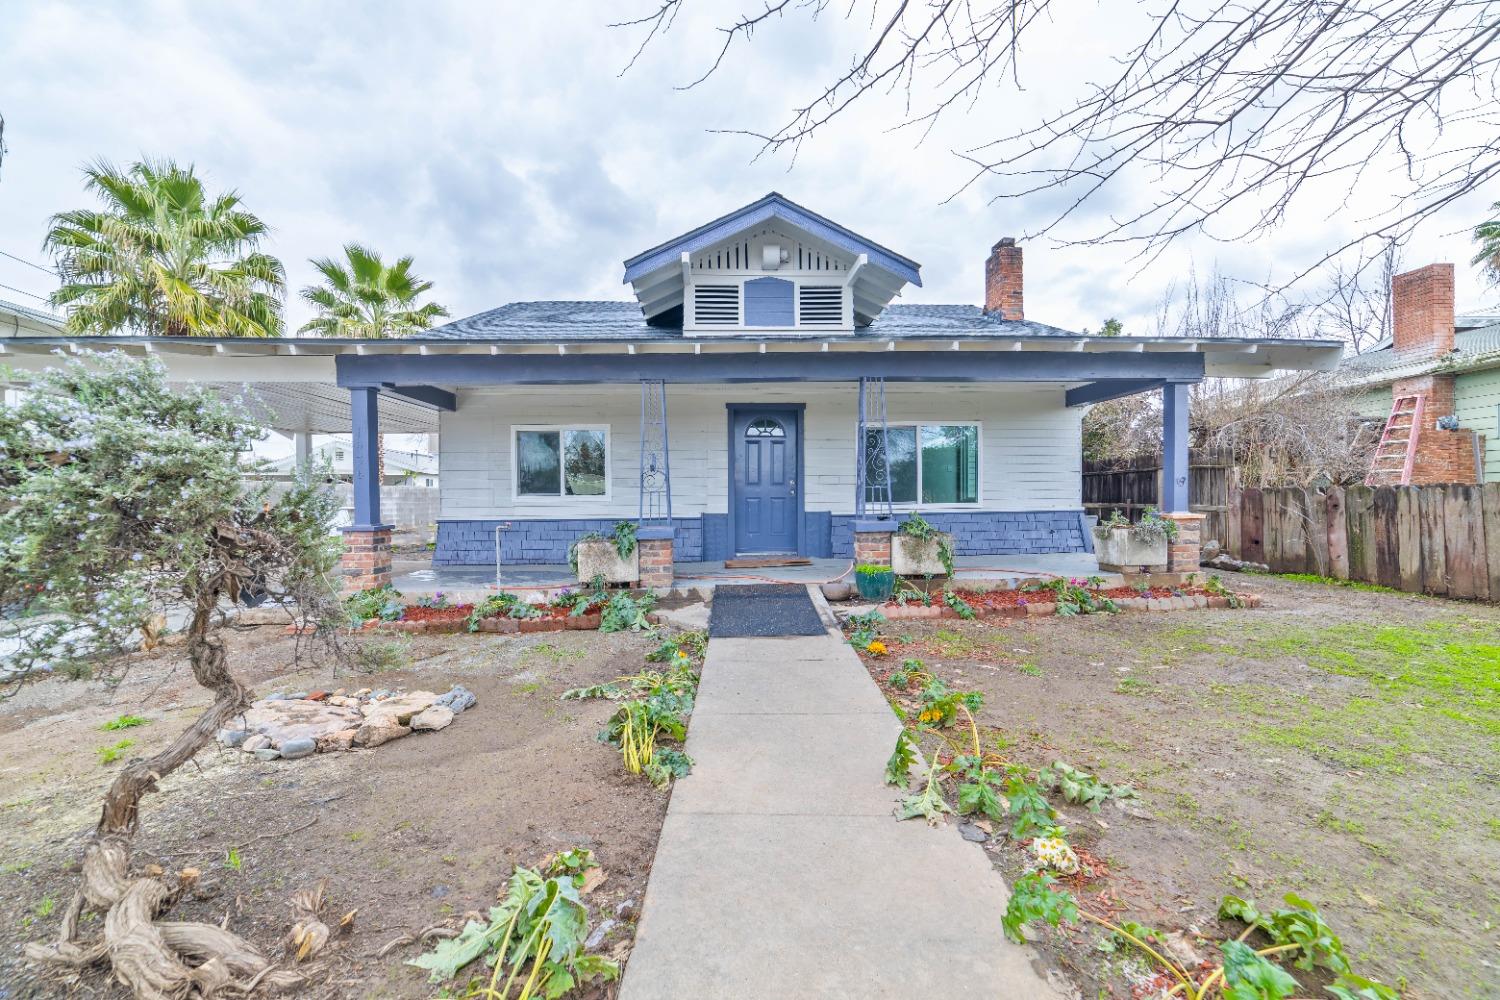 Photo of 1036 N Pleasant Ave in Fresno, CA